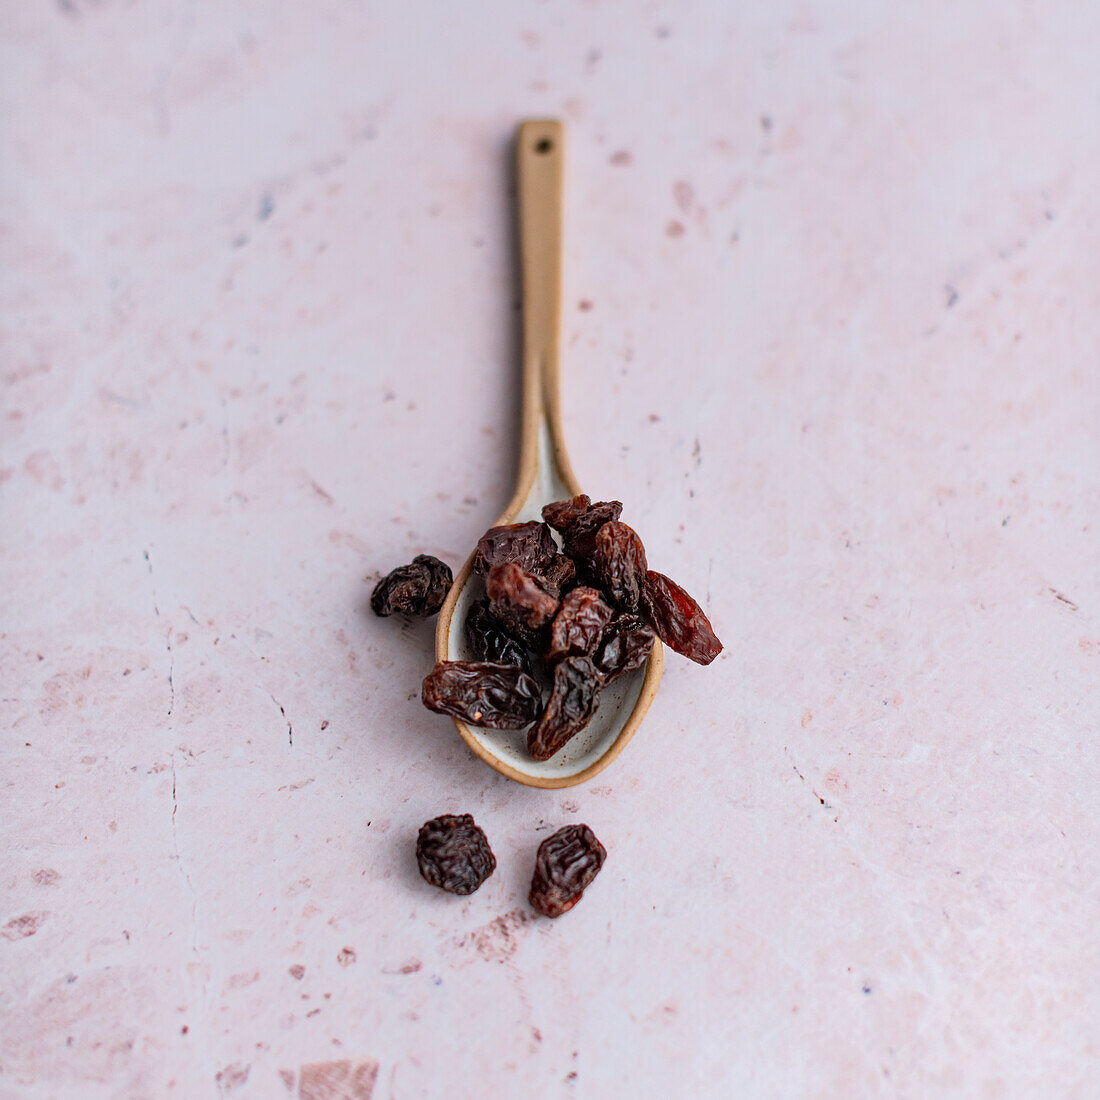 Spoon with raisins on a purple background